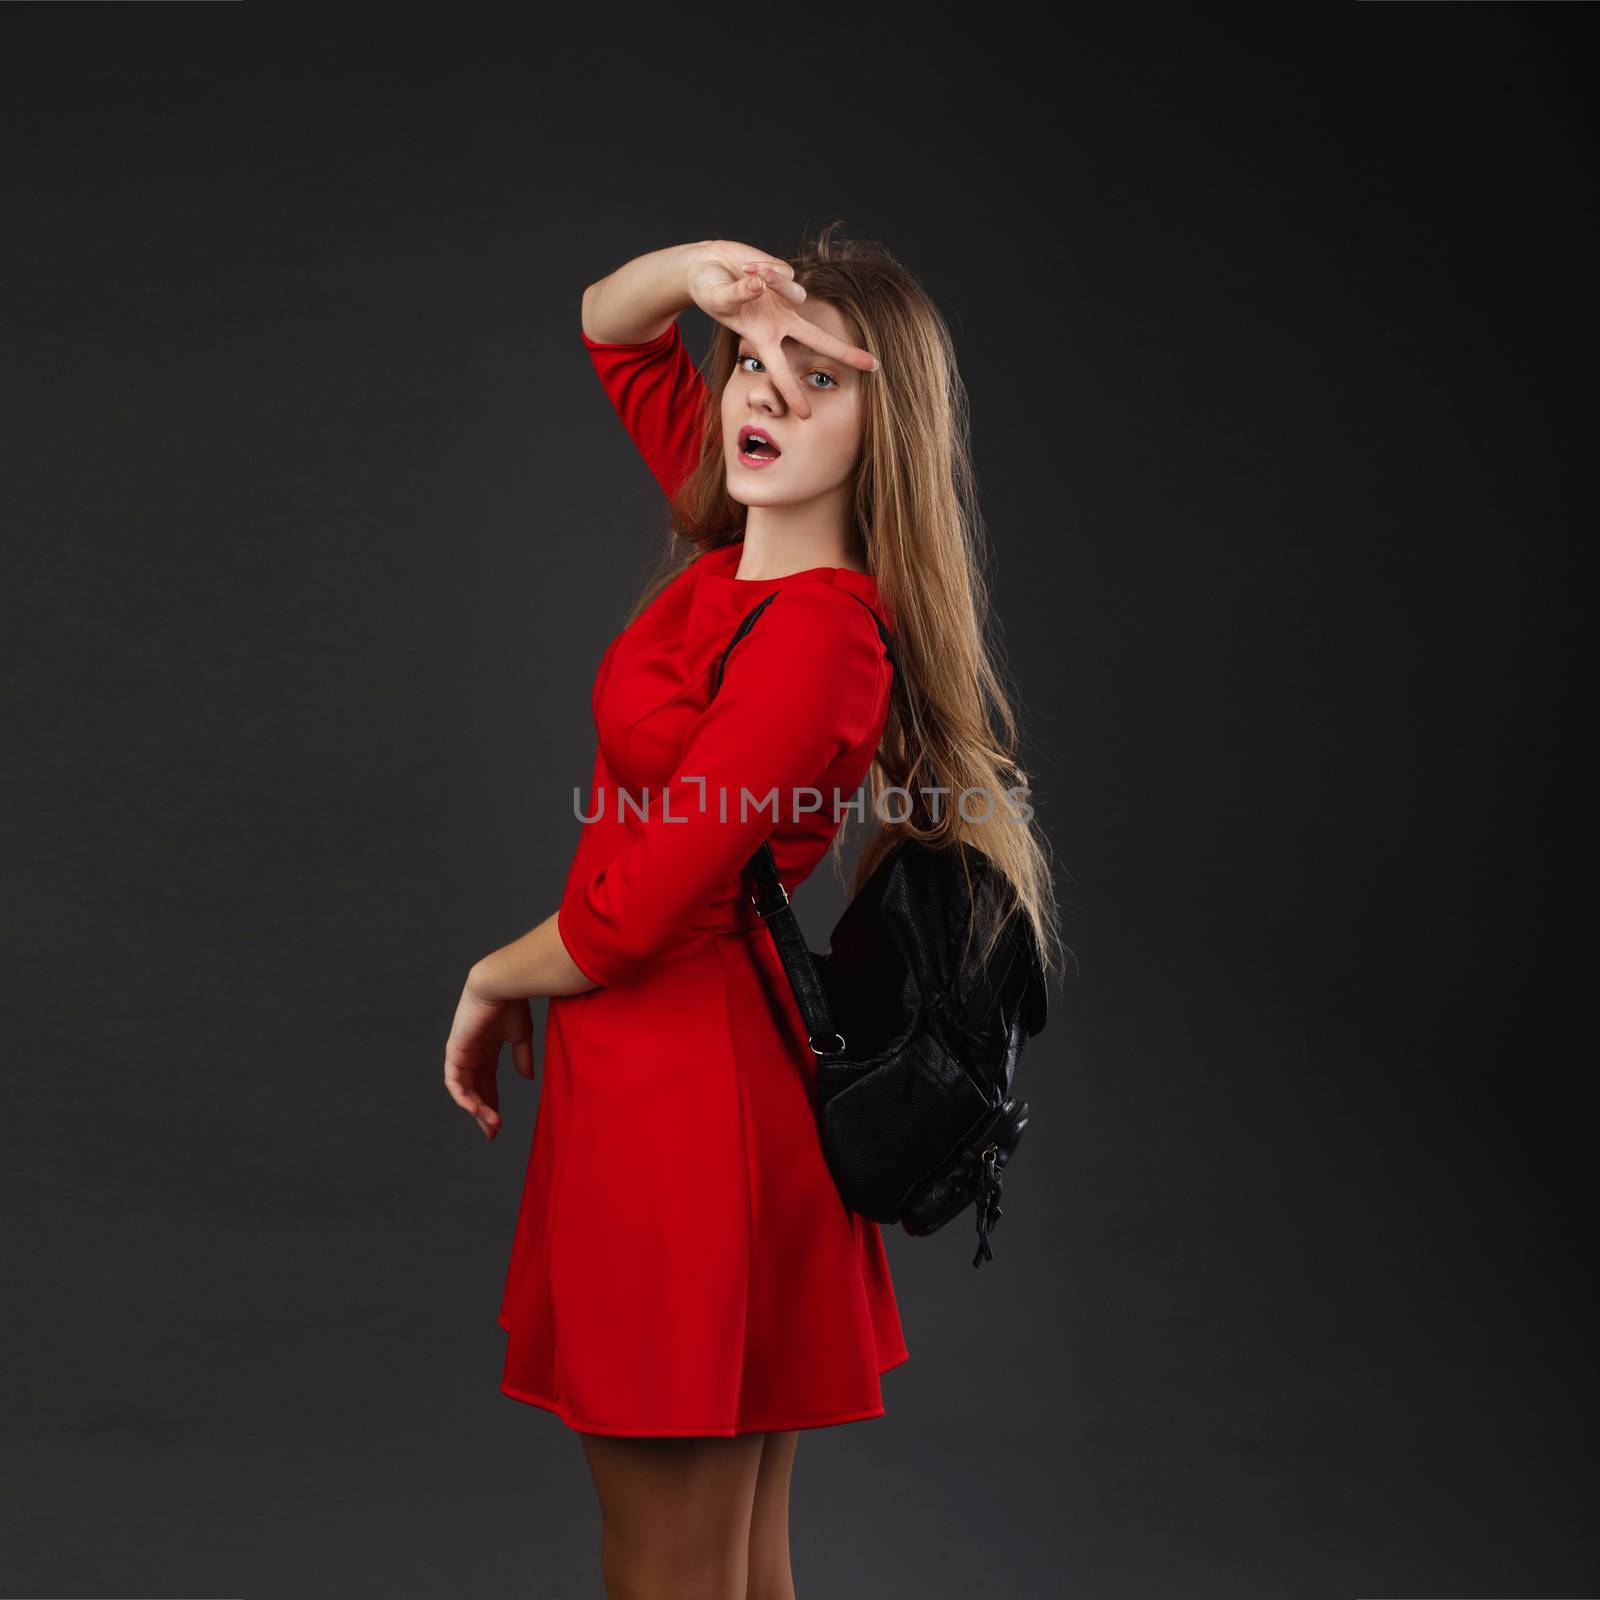 Portrait of a girl in a red dress with a black leather backpack by natazhekova